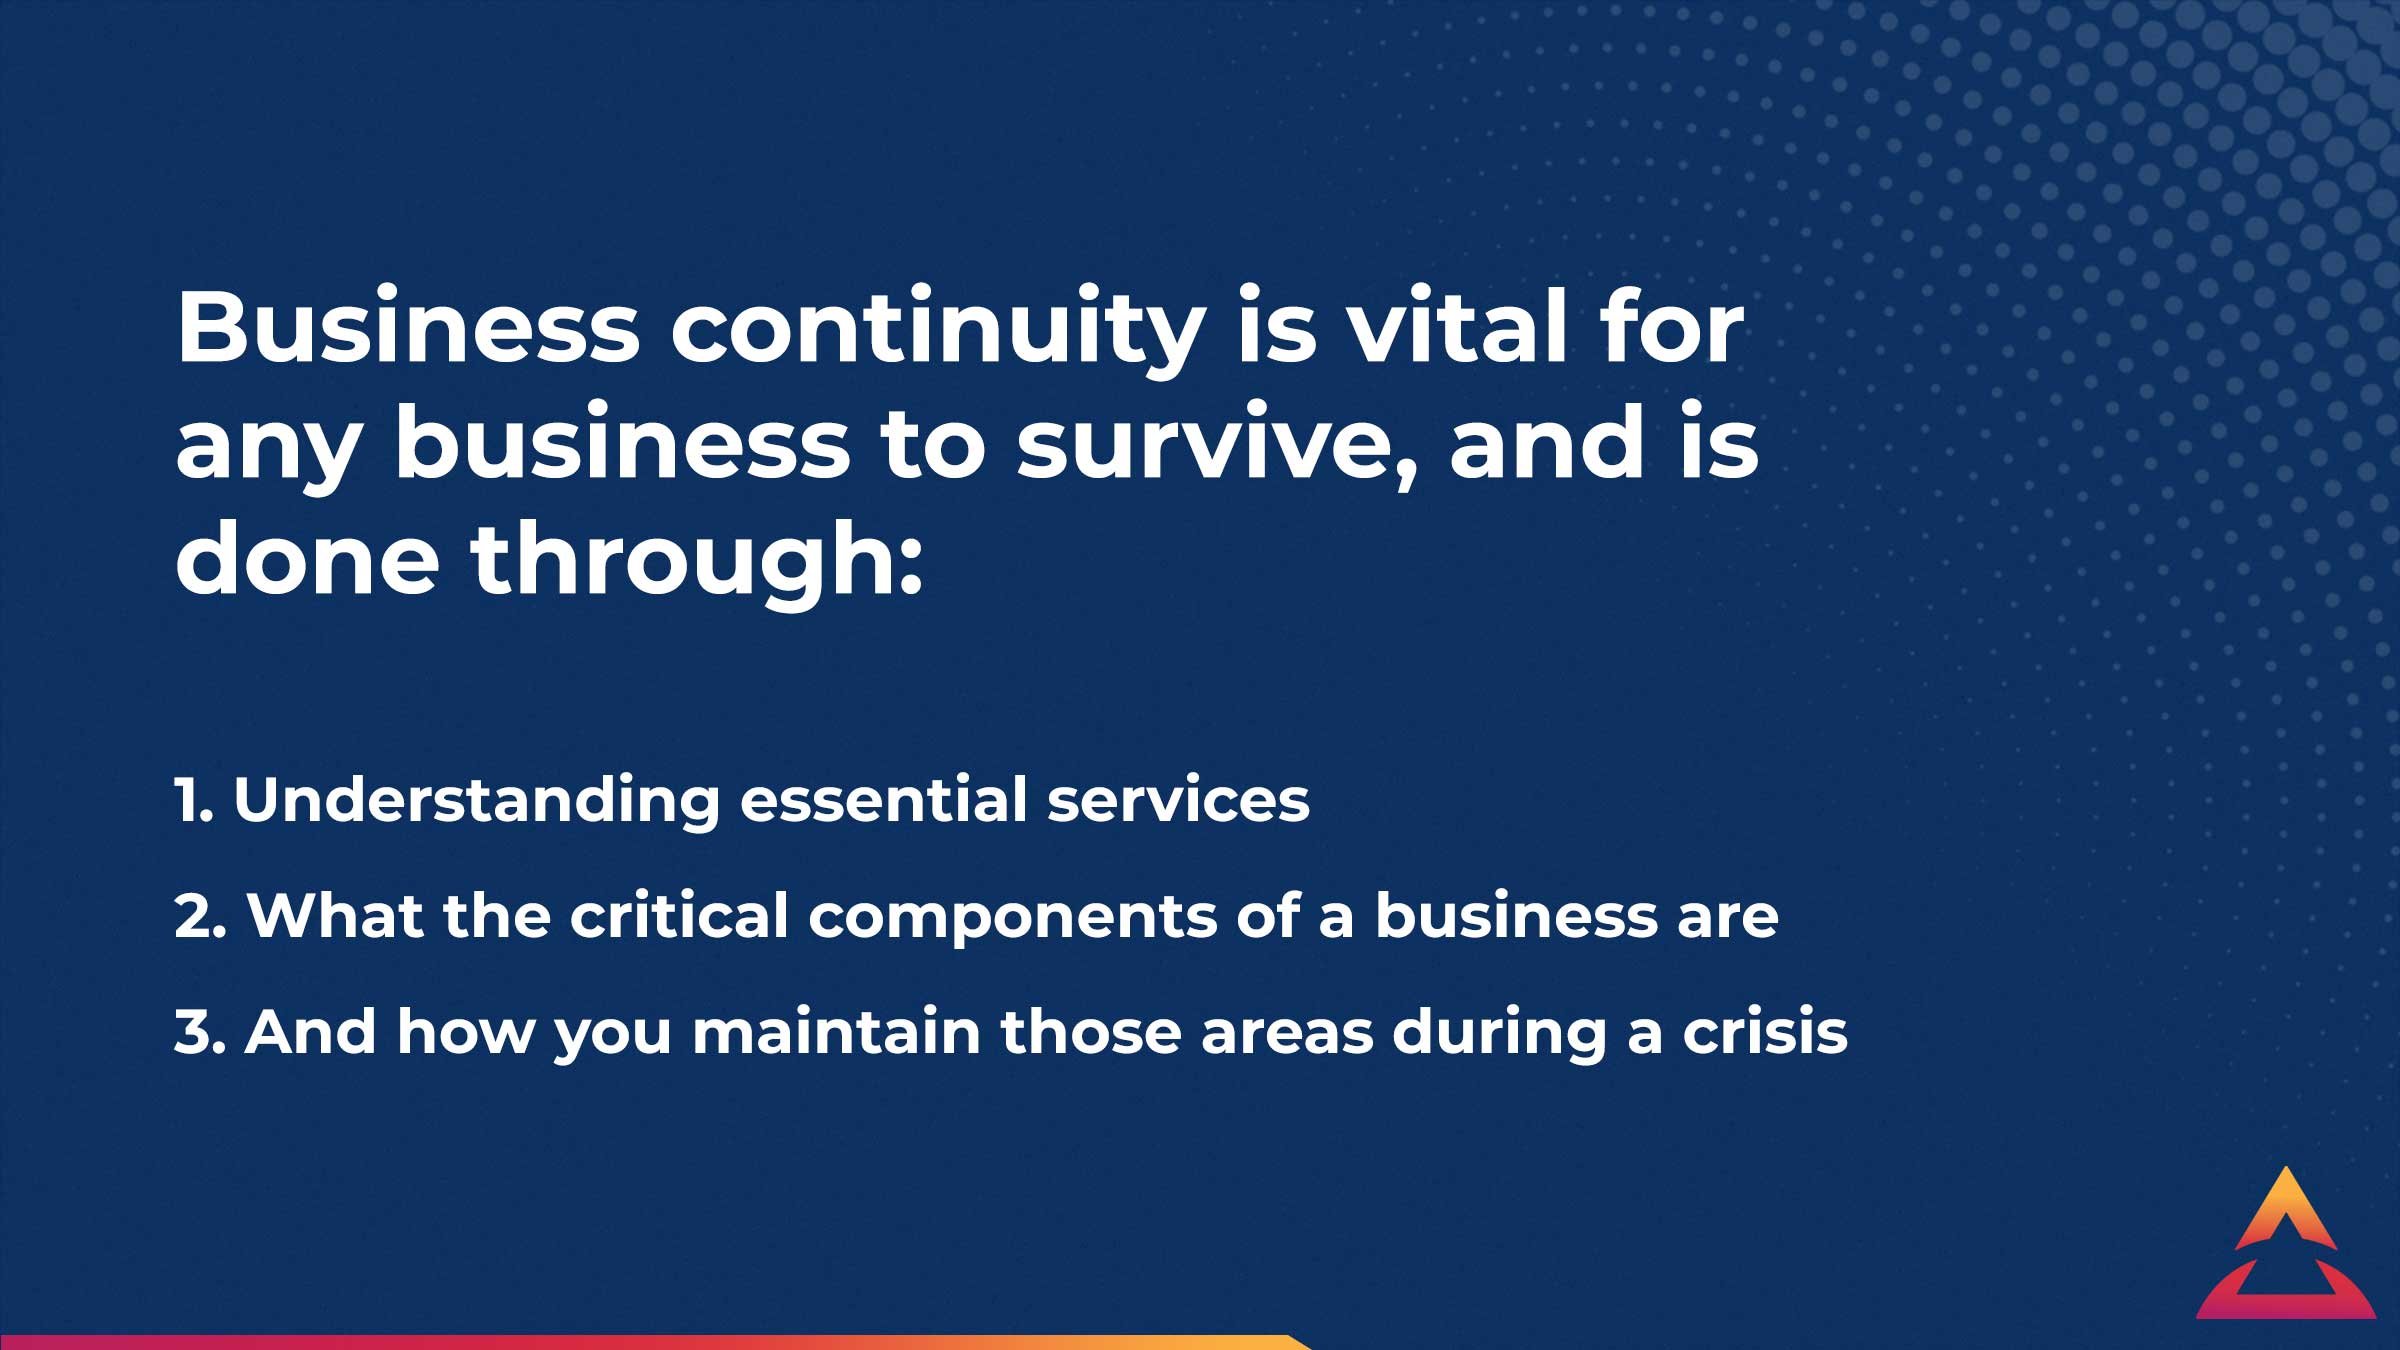 Business continuity is vital for any business to survive, and is done through understanding essential services, what the critical components of a business are, and how you maintain them during a crisis.